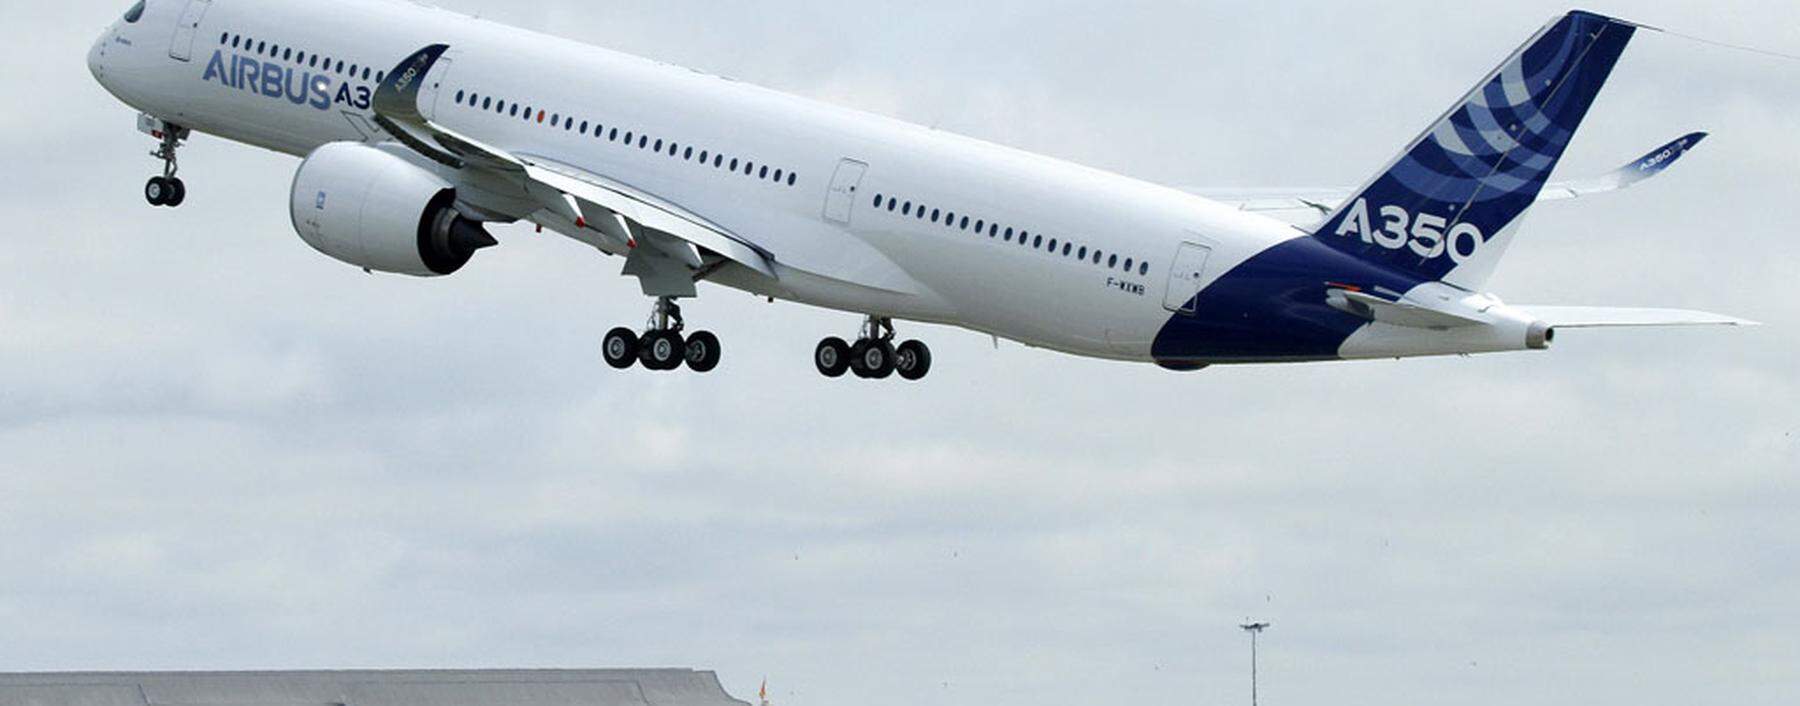 The new Airbus A350 takes off for its maiden flight at the Toulouse-Blagnac airport in southwestern France